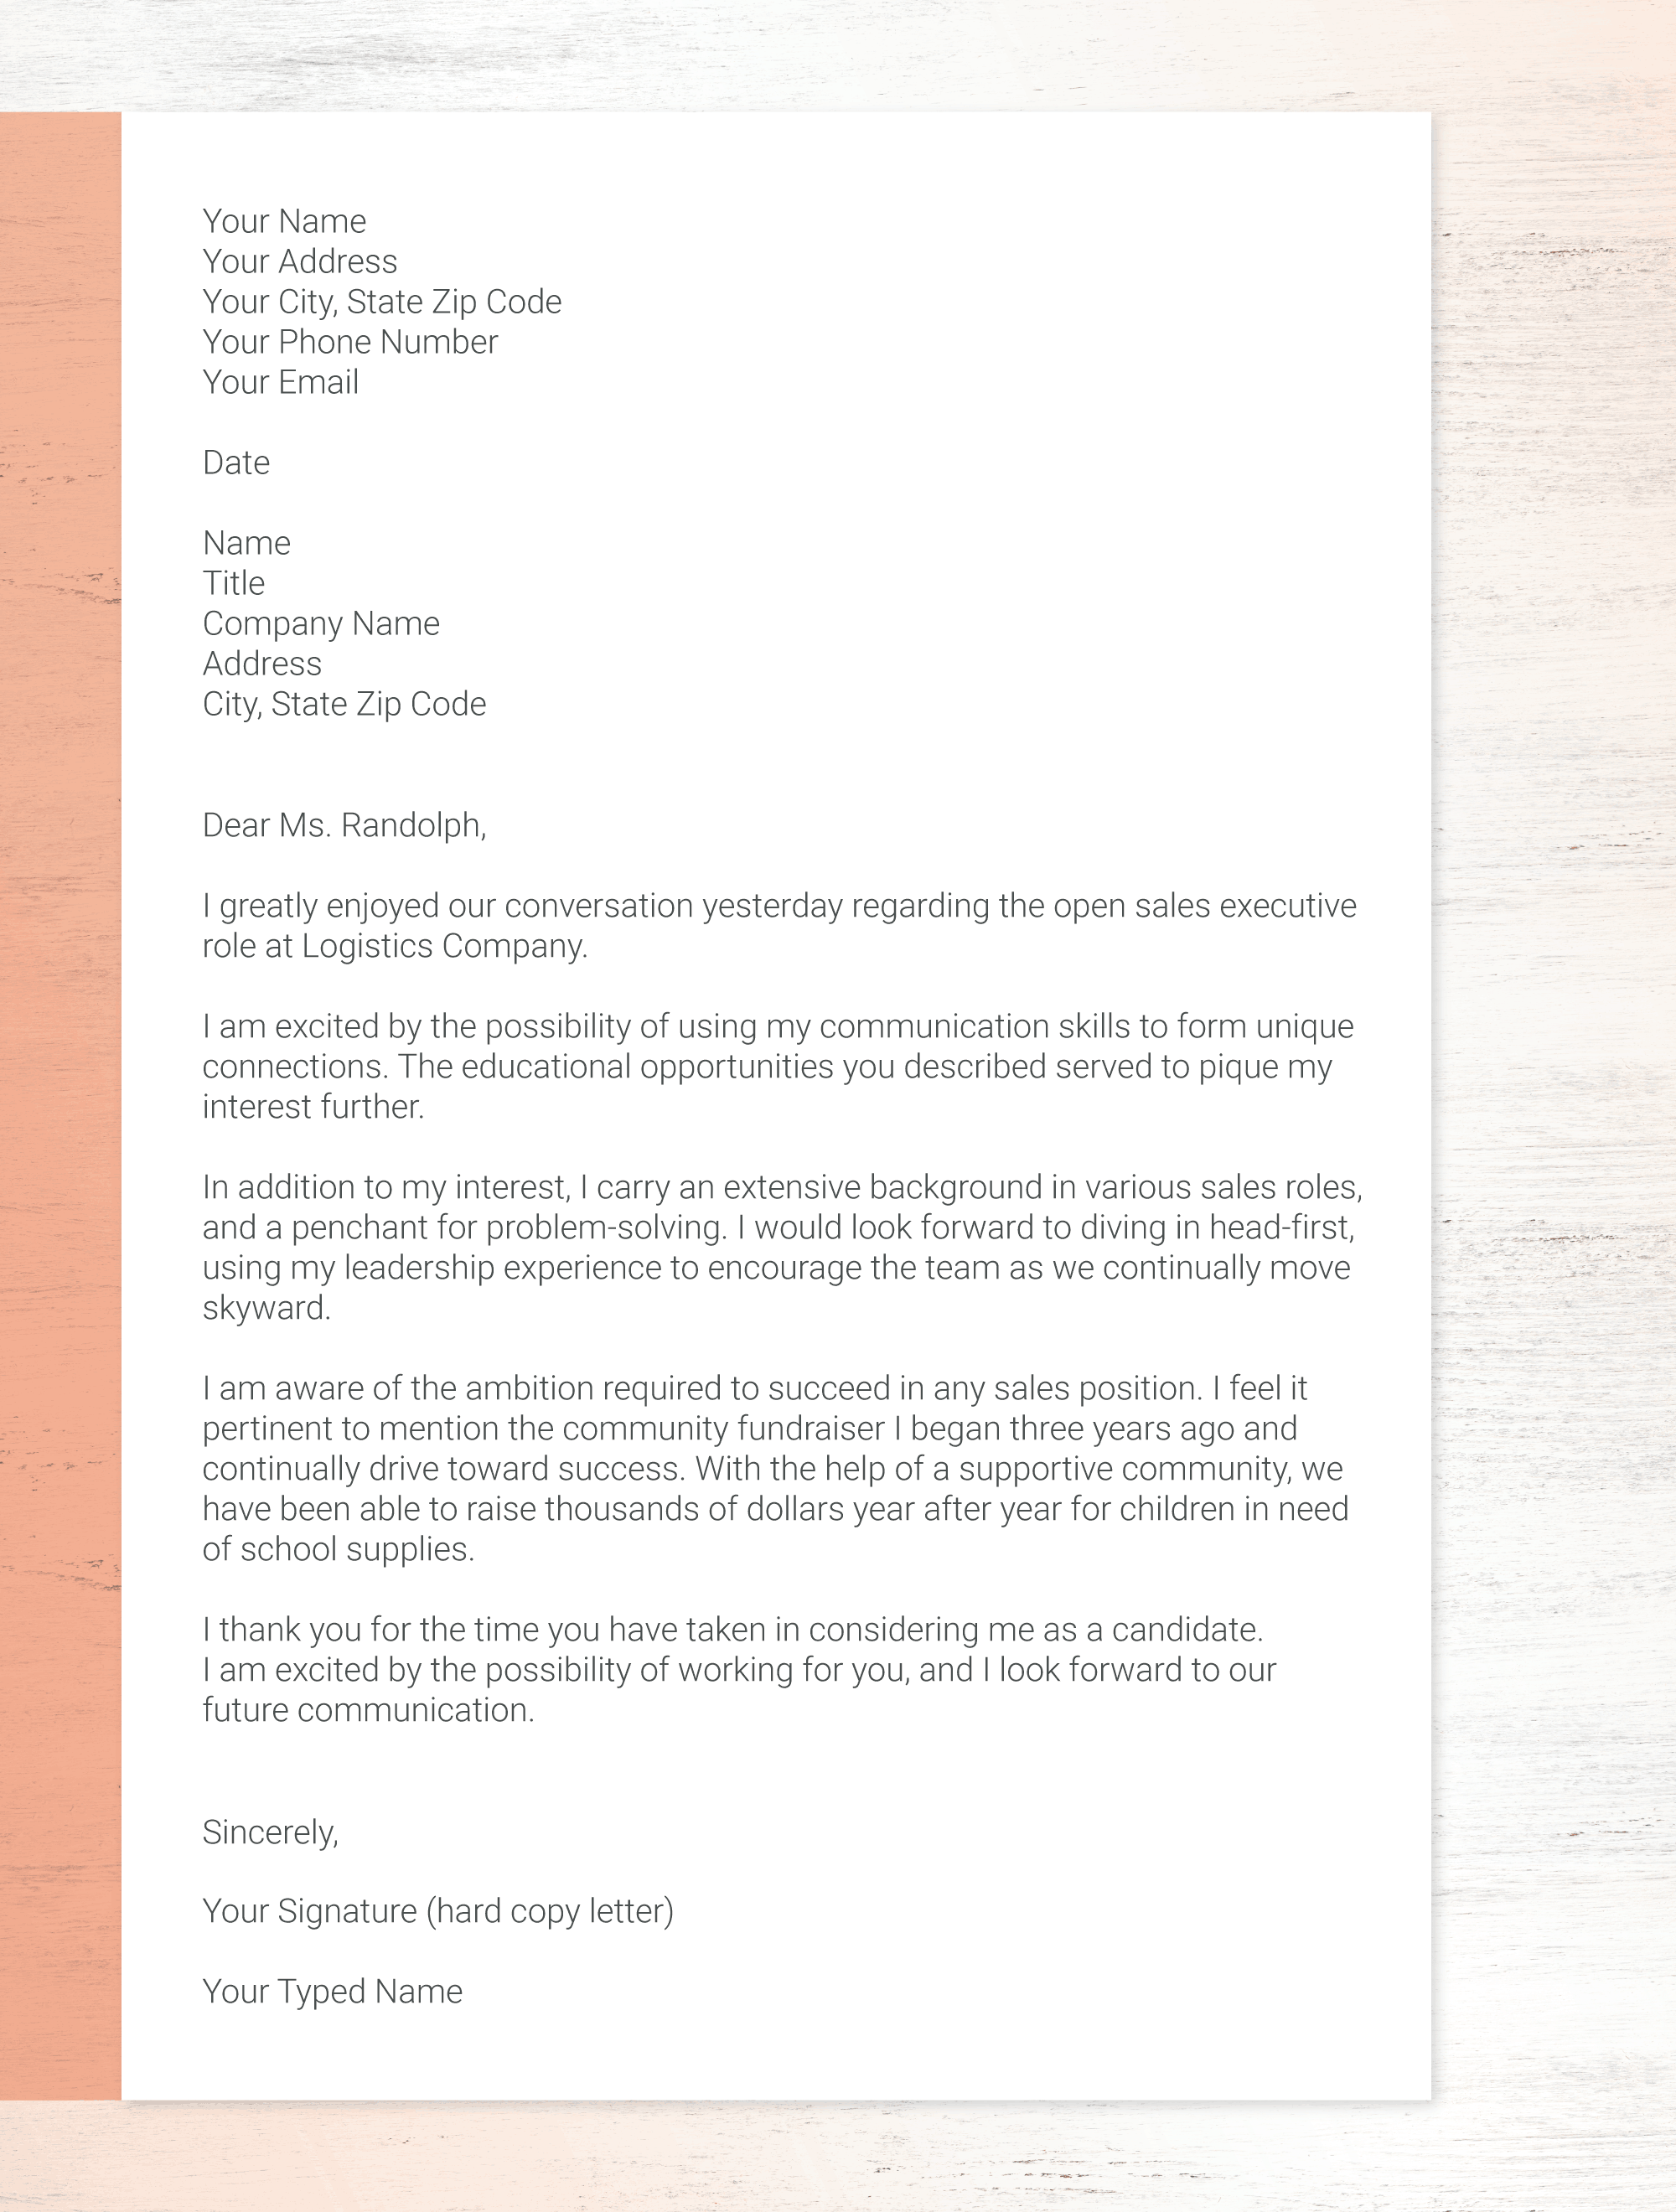 Letter After Phone Interview from learn.g2.com